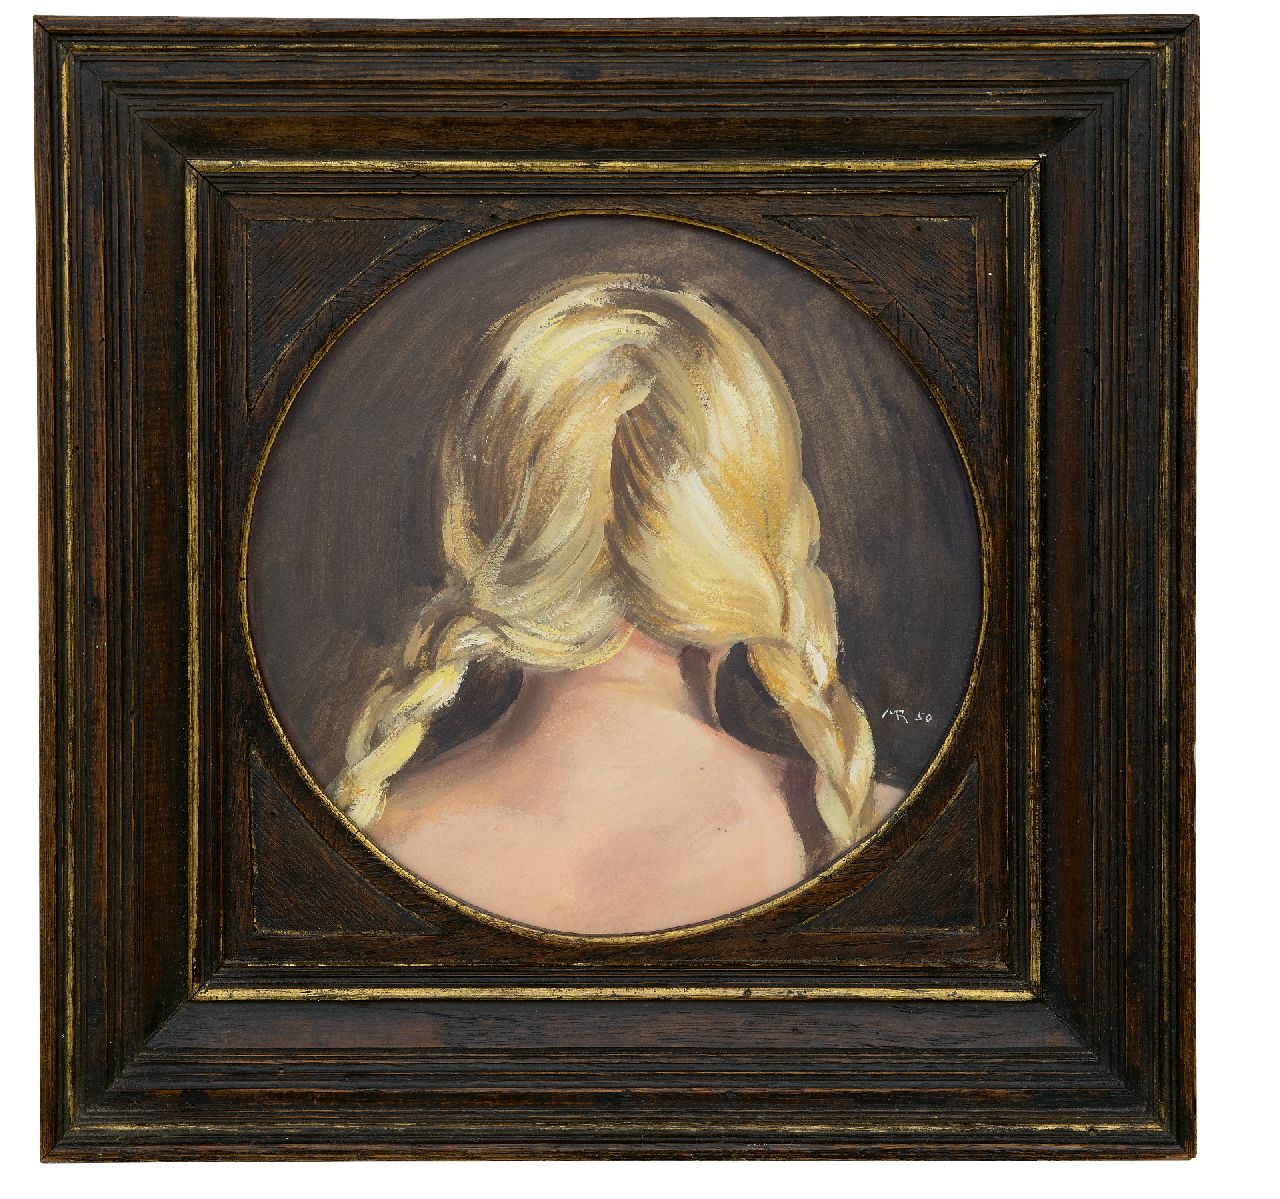 Rimböck M.  | Max Rimböck | Paintings offered for sale | A girl with braids seen from the back, oil on paper 21.0, signed l.r. with monogram and dated '50